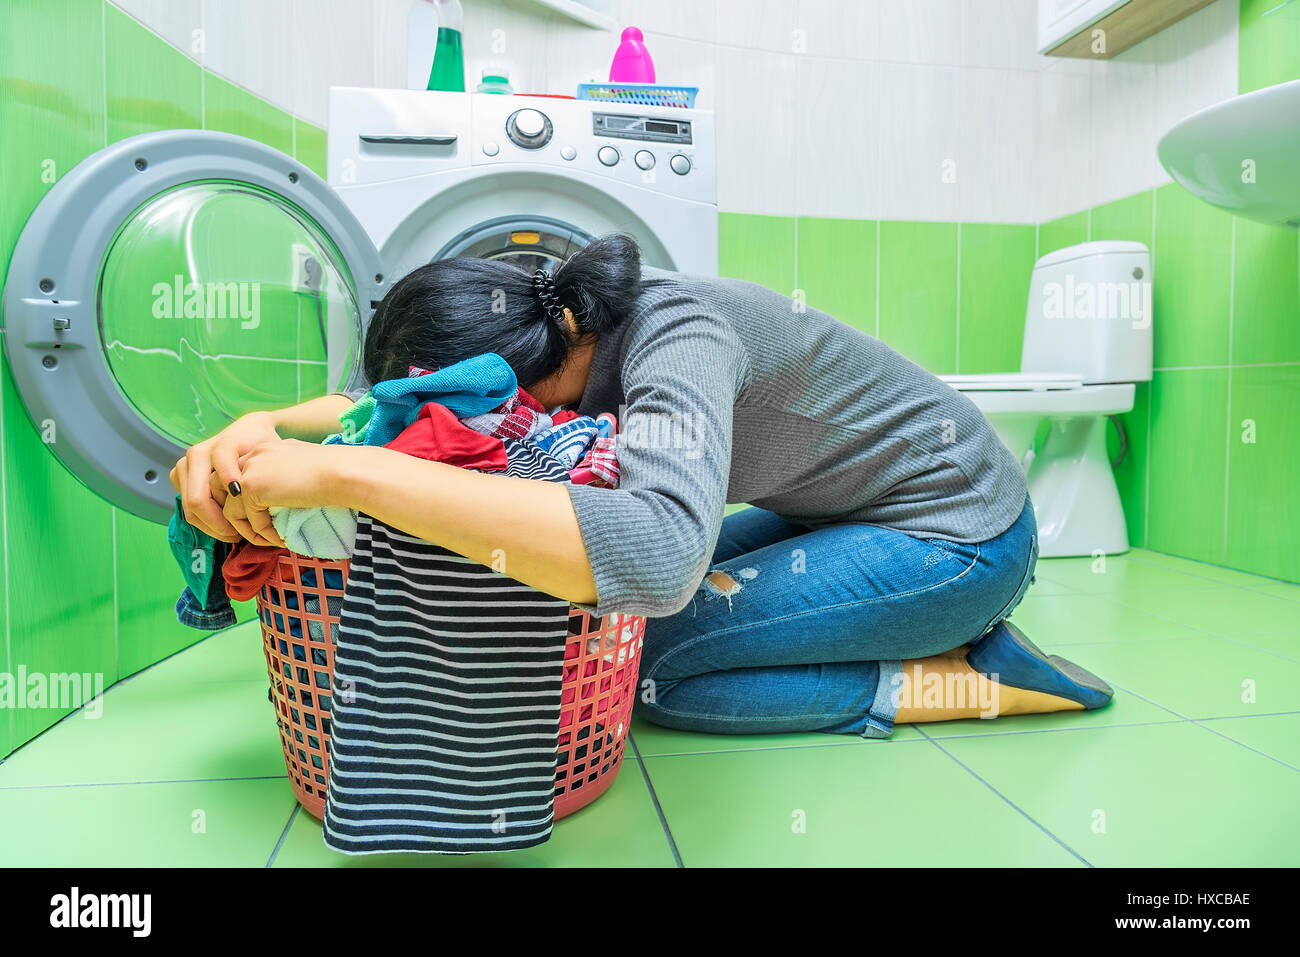 Woman tired of washing. She's lying on the laundry basket. Stock Photo